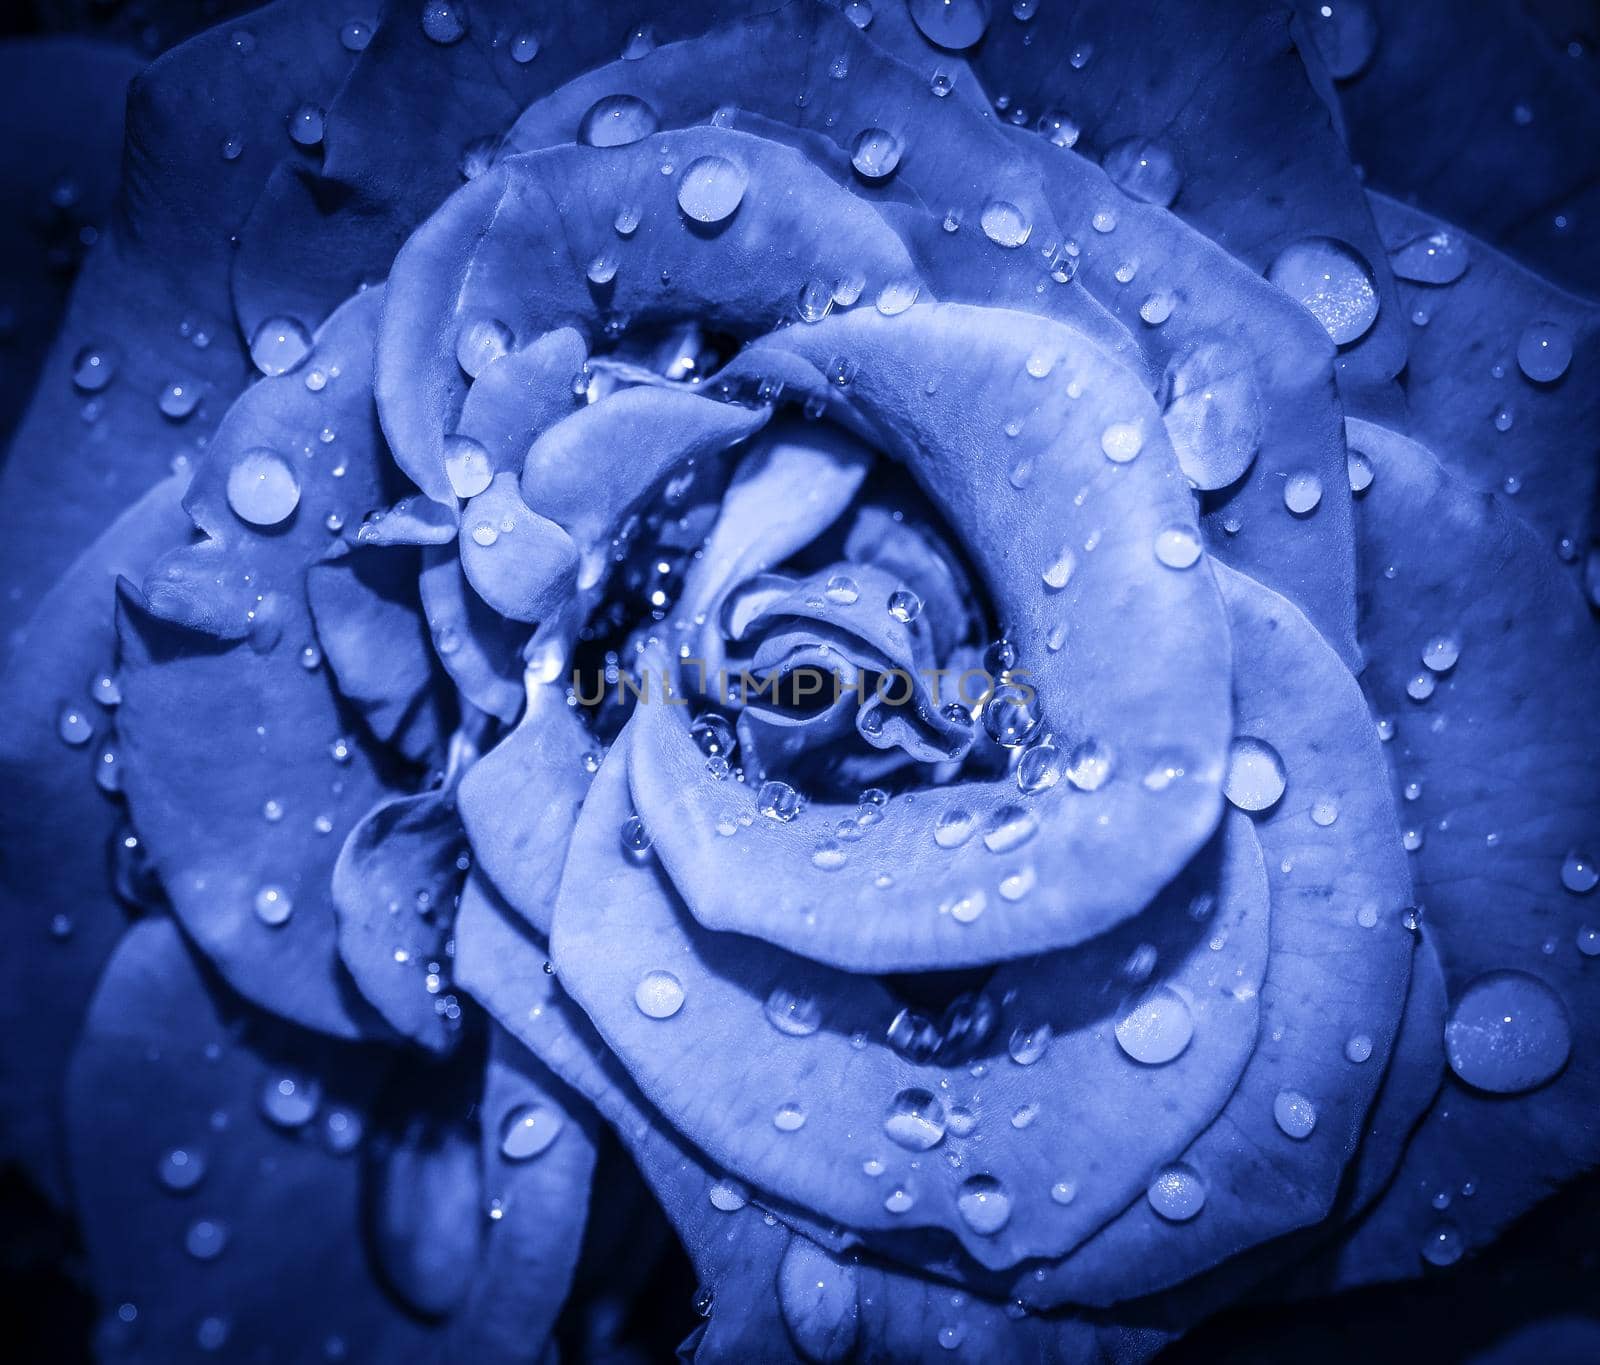 Navy blue Rose flower head close up. Rose with water drops. Top view, deep focus. Petals of a rose close up view